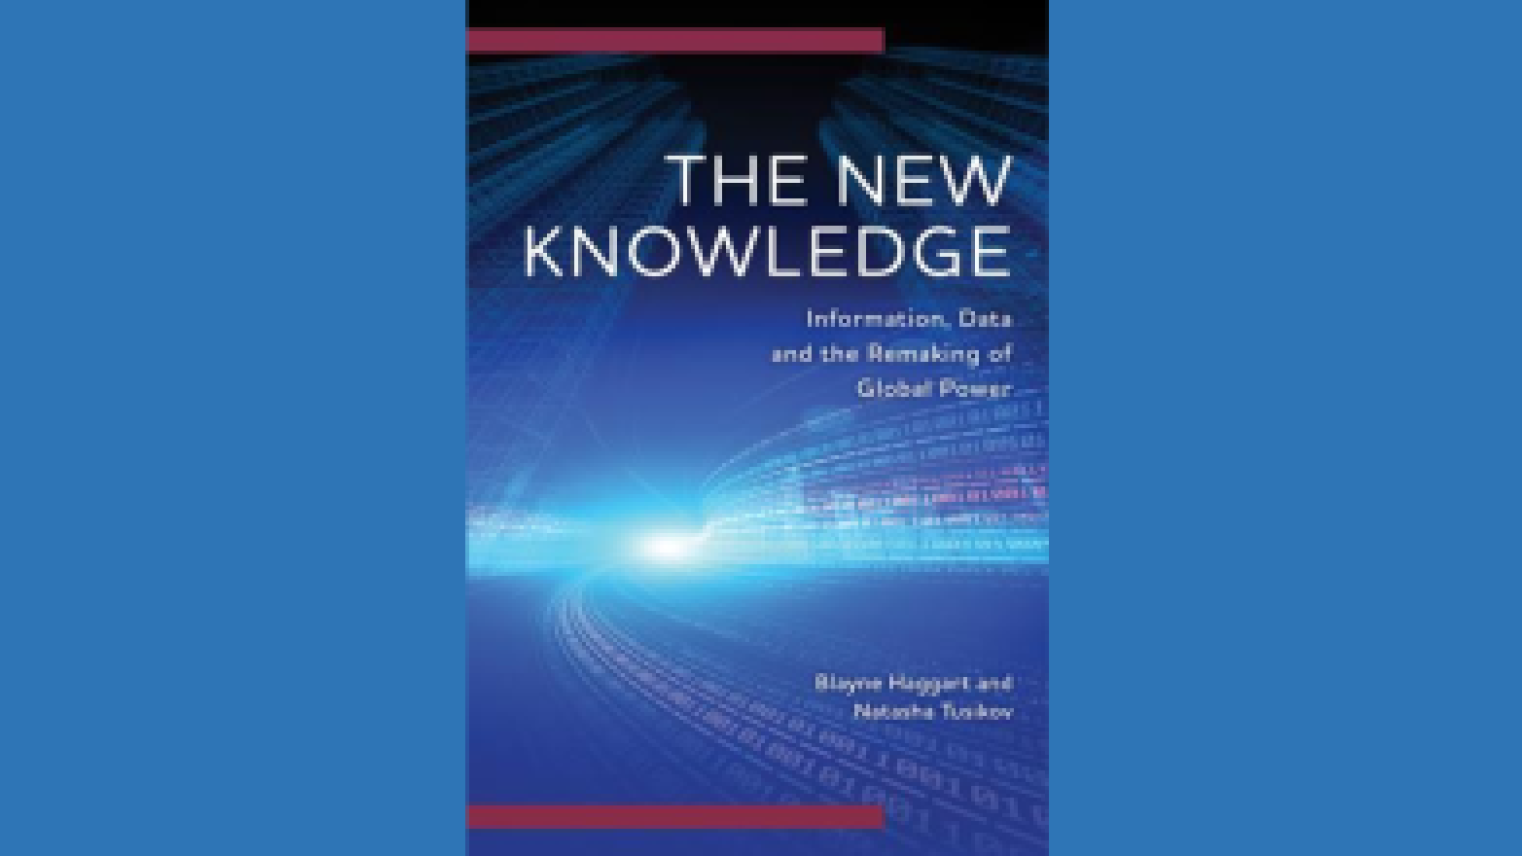 Image credit: ‘The new knowledge: information, data and the remaking of global power’ book cover supplied by Natasha Tusikov.